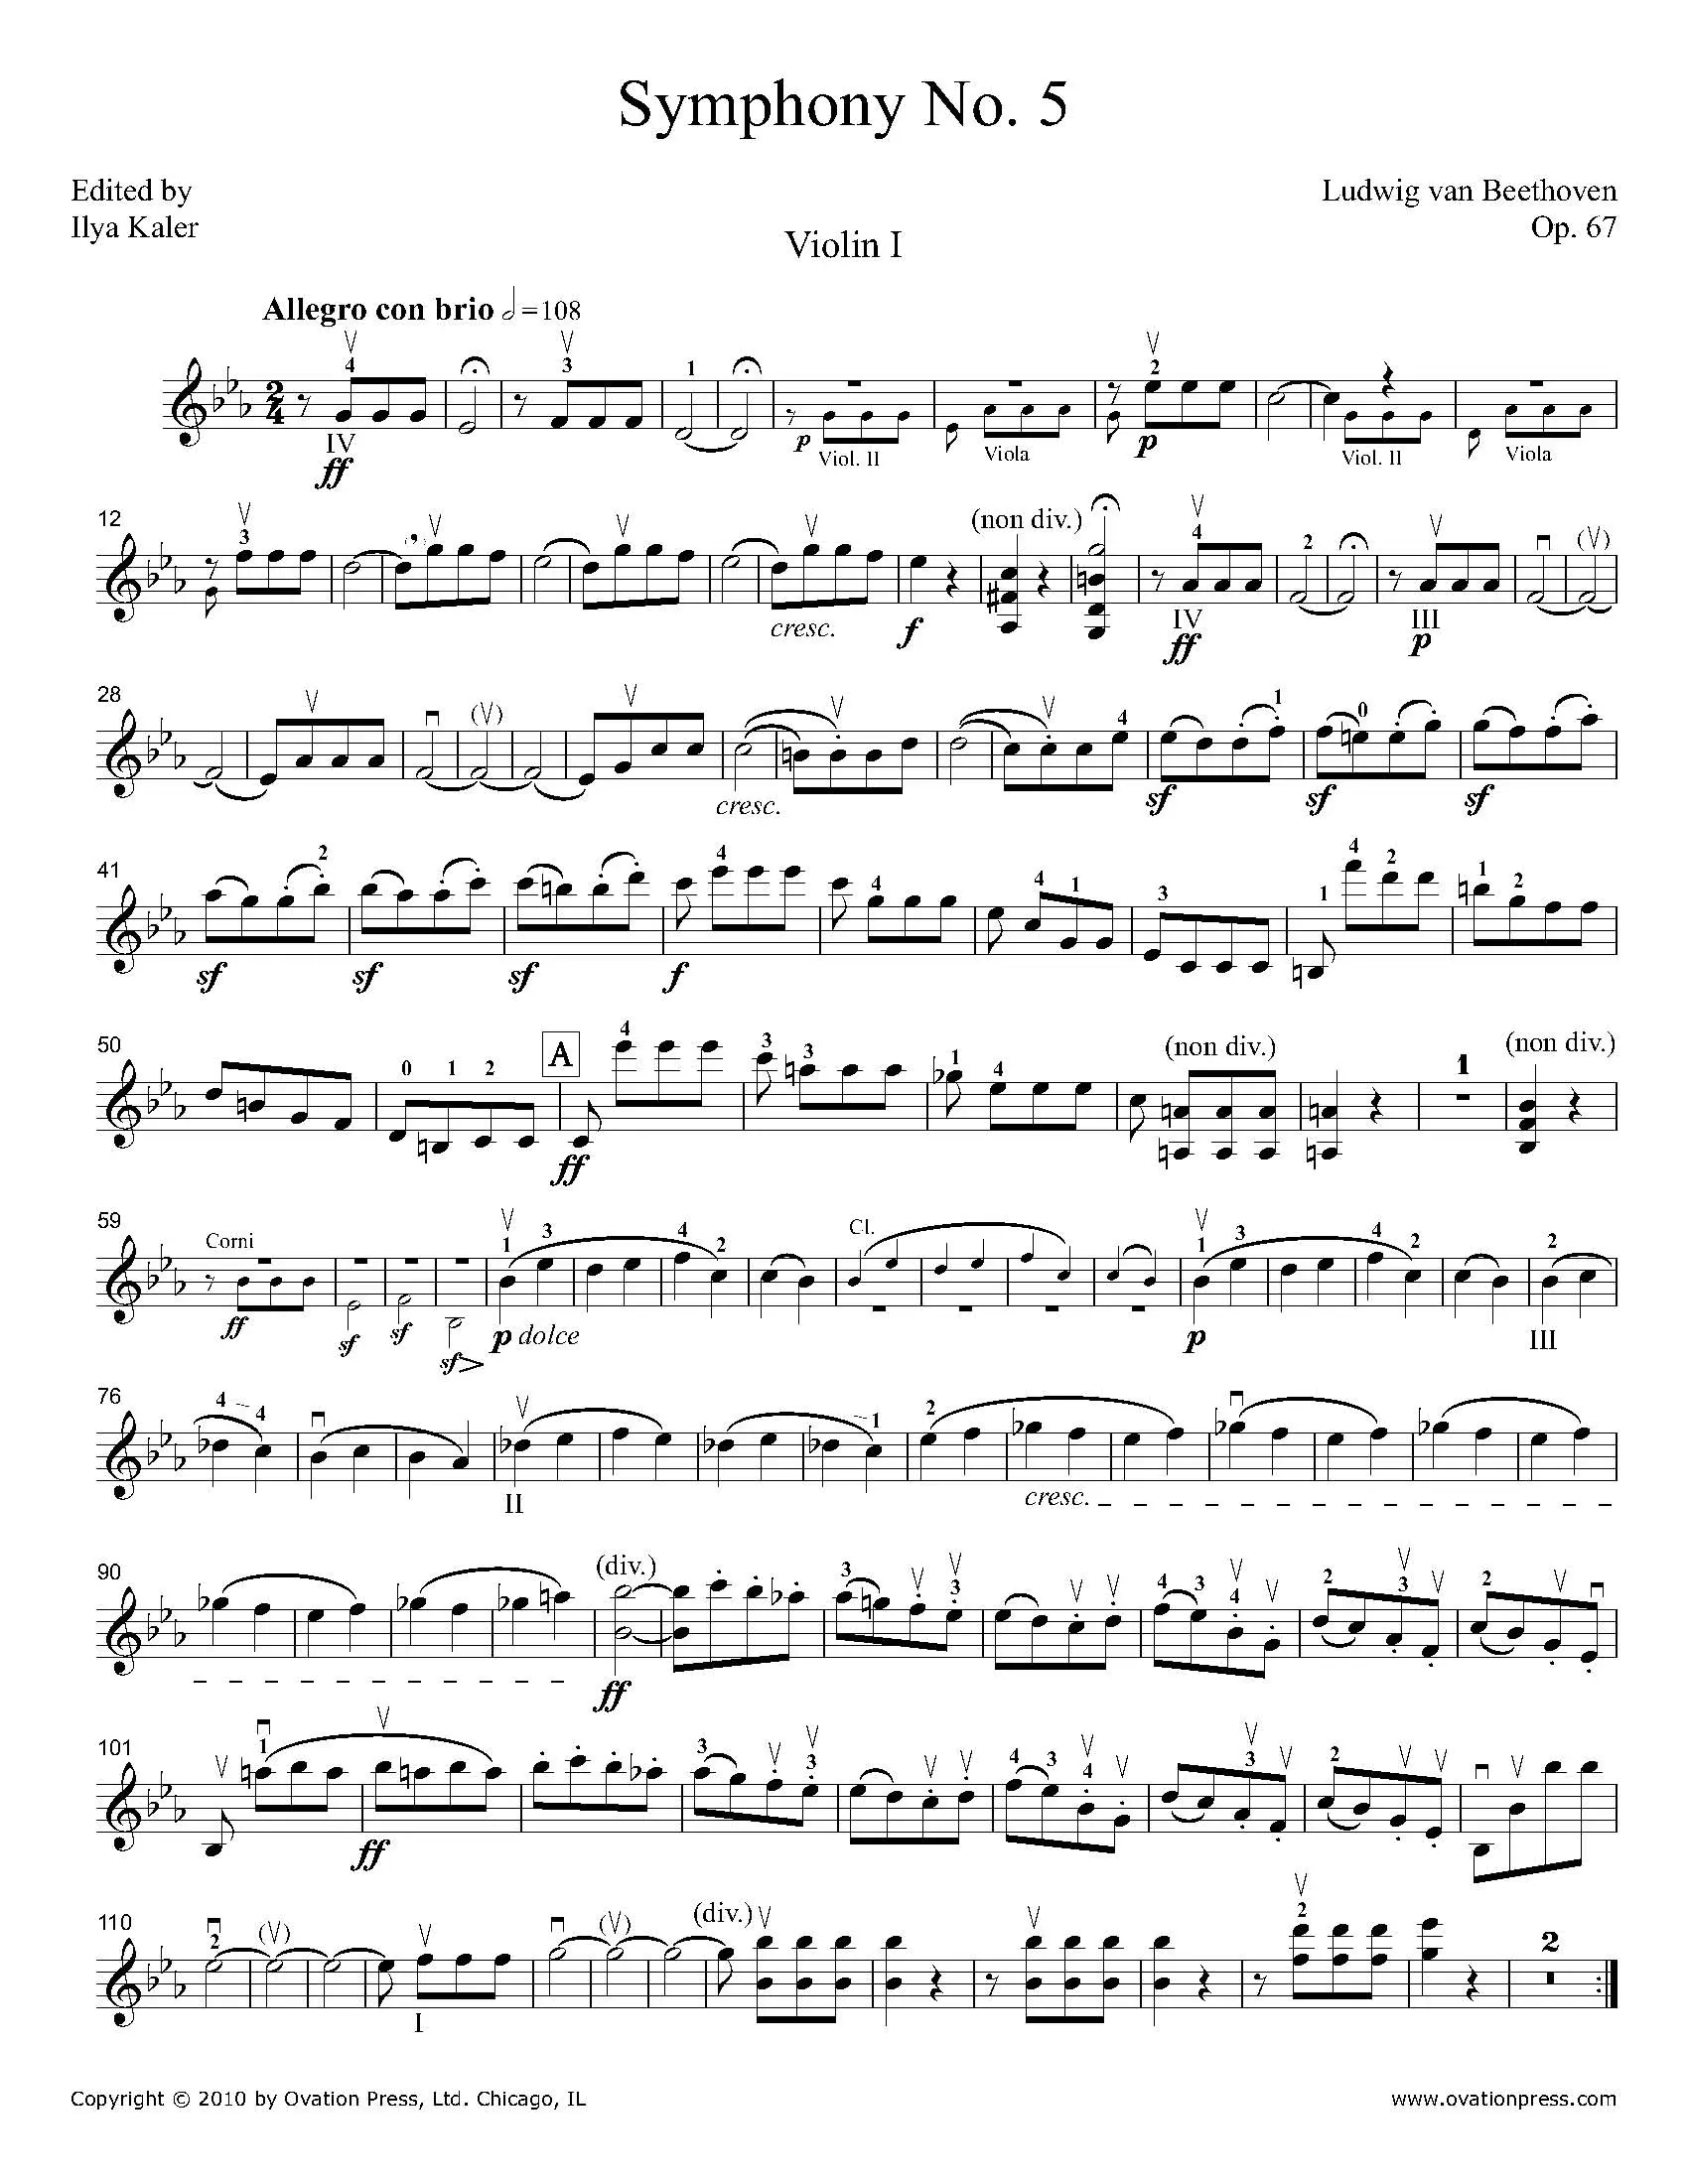 symphony partitura violin - How many violin sections are there in an orchestra